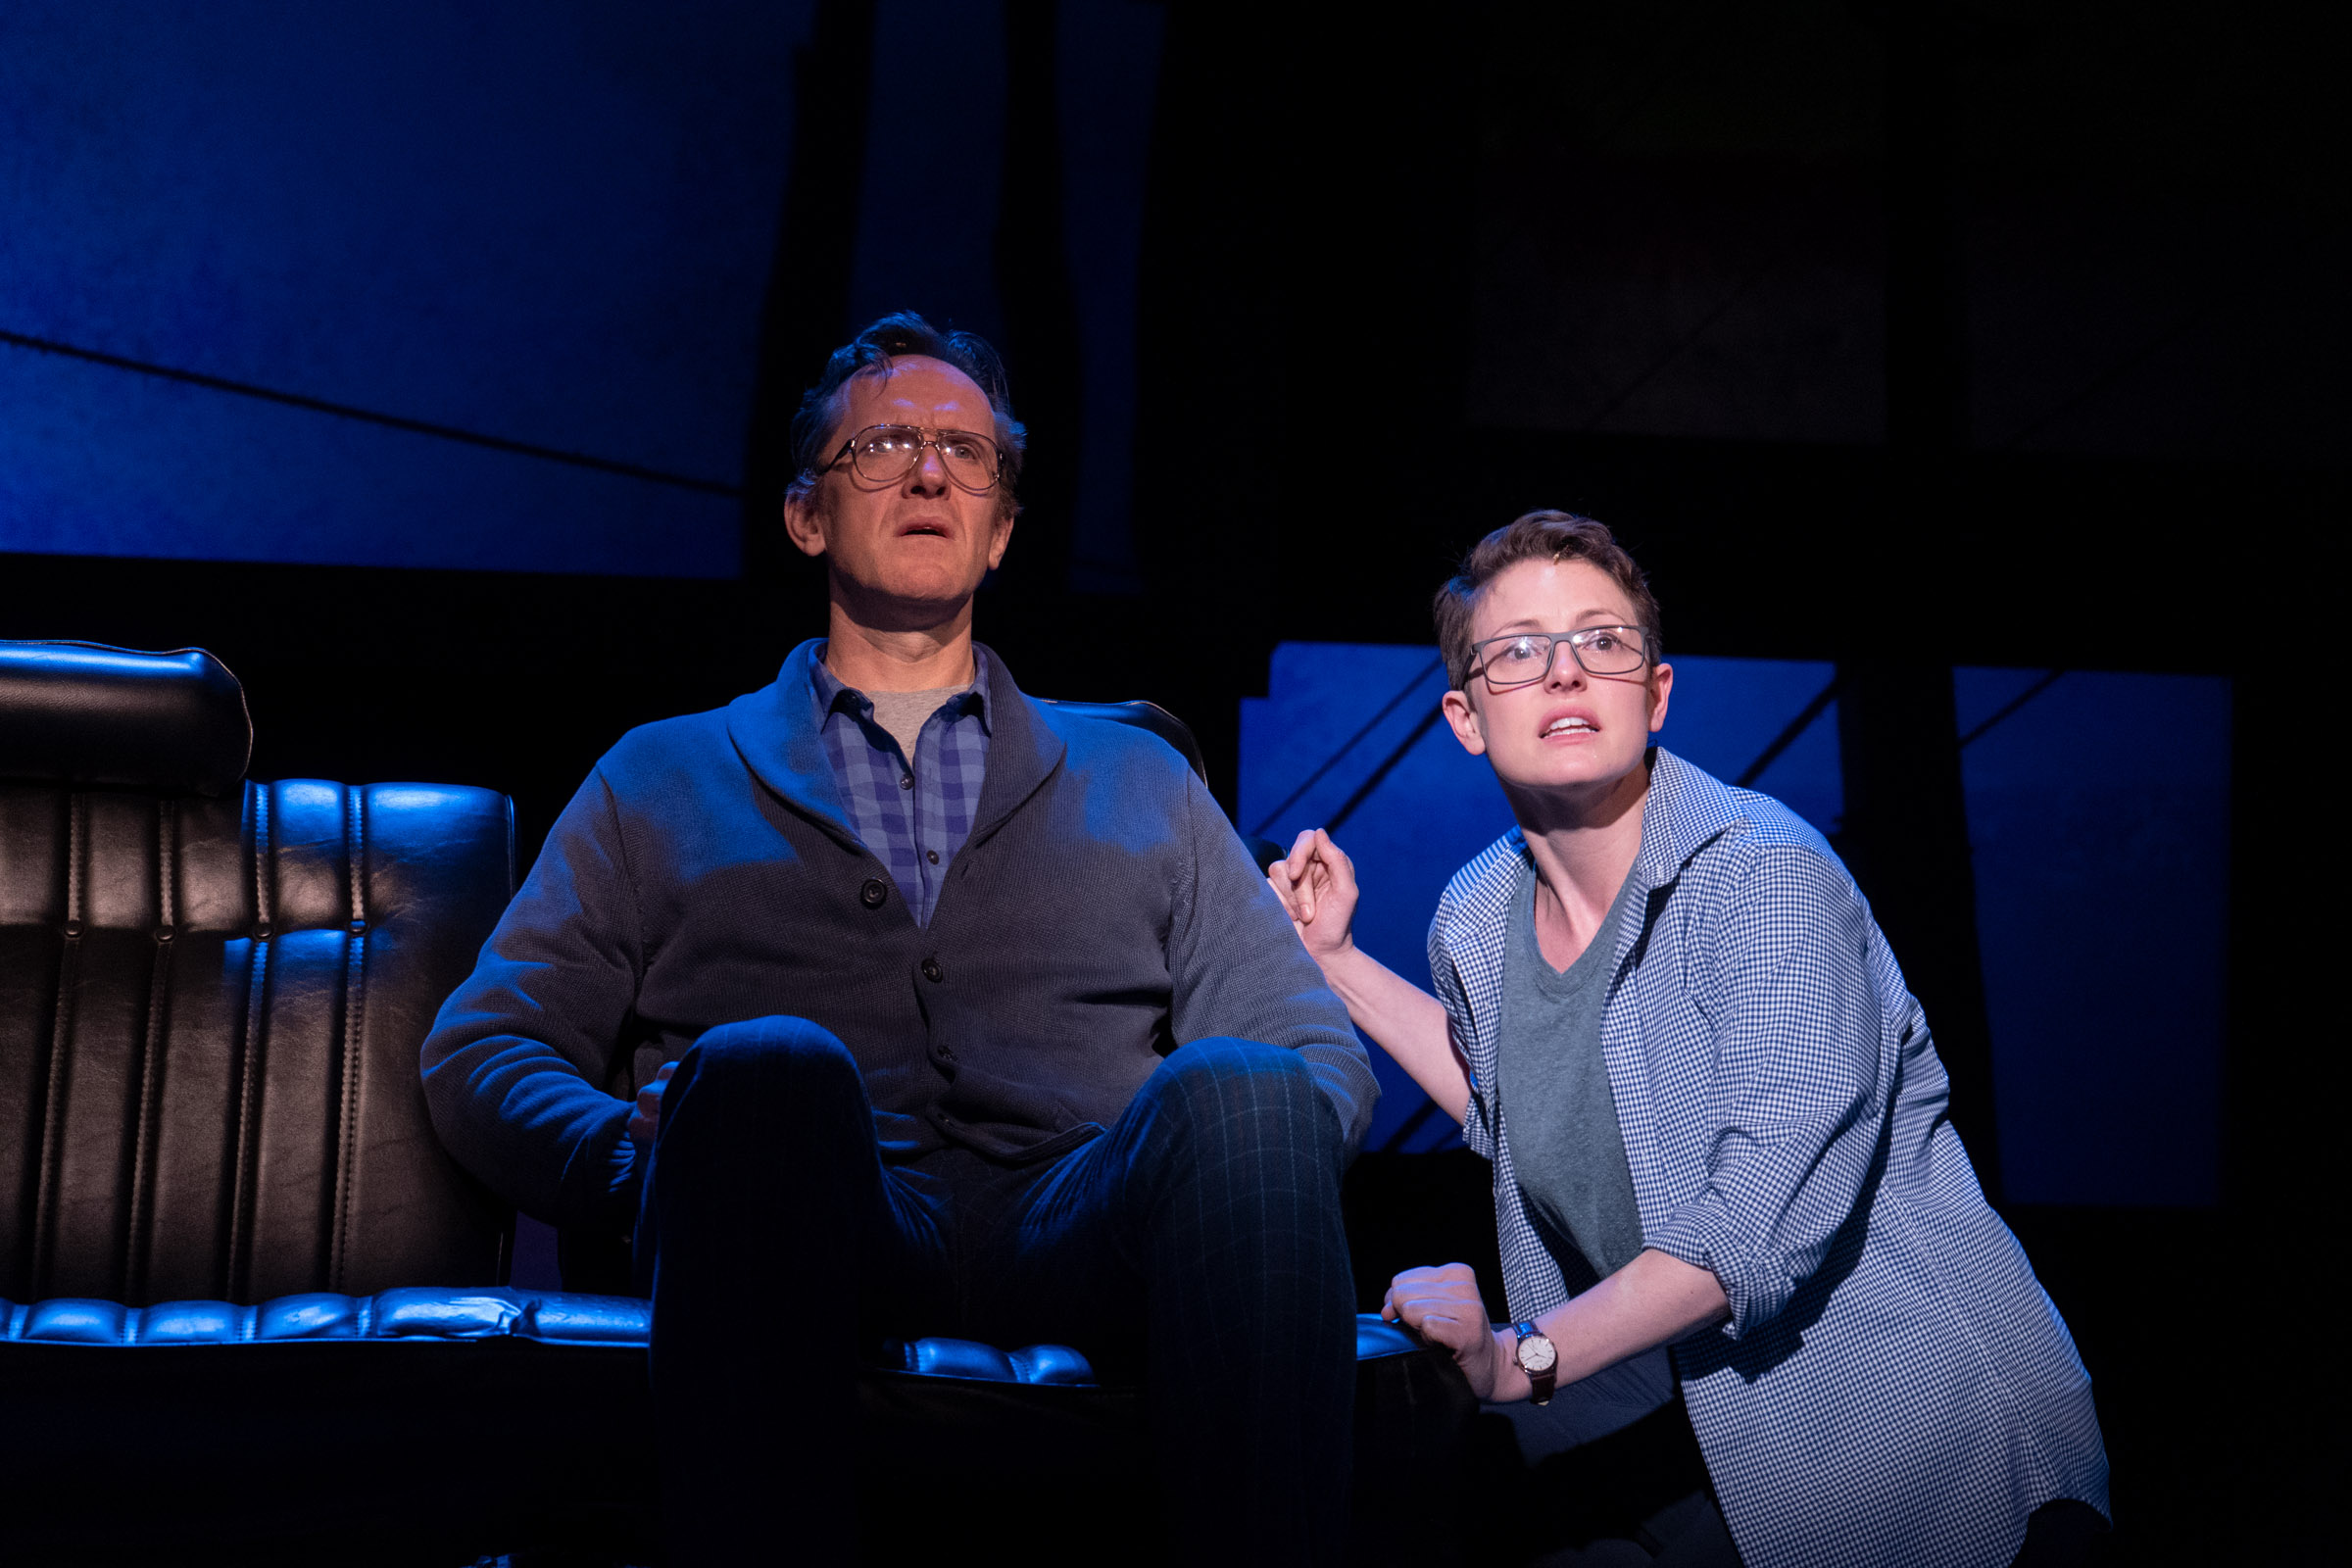 Fun Home&lt;strong&gt;Baltimore Center Stage&lt;/strong&gt;&lt;i&gt;Learn More&lt;/i&gt;